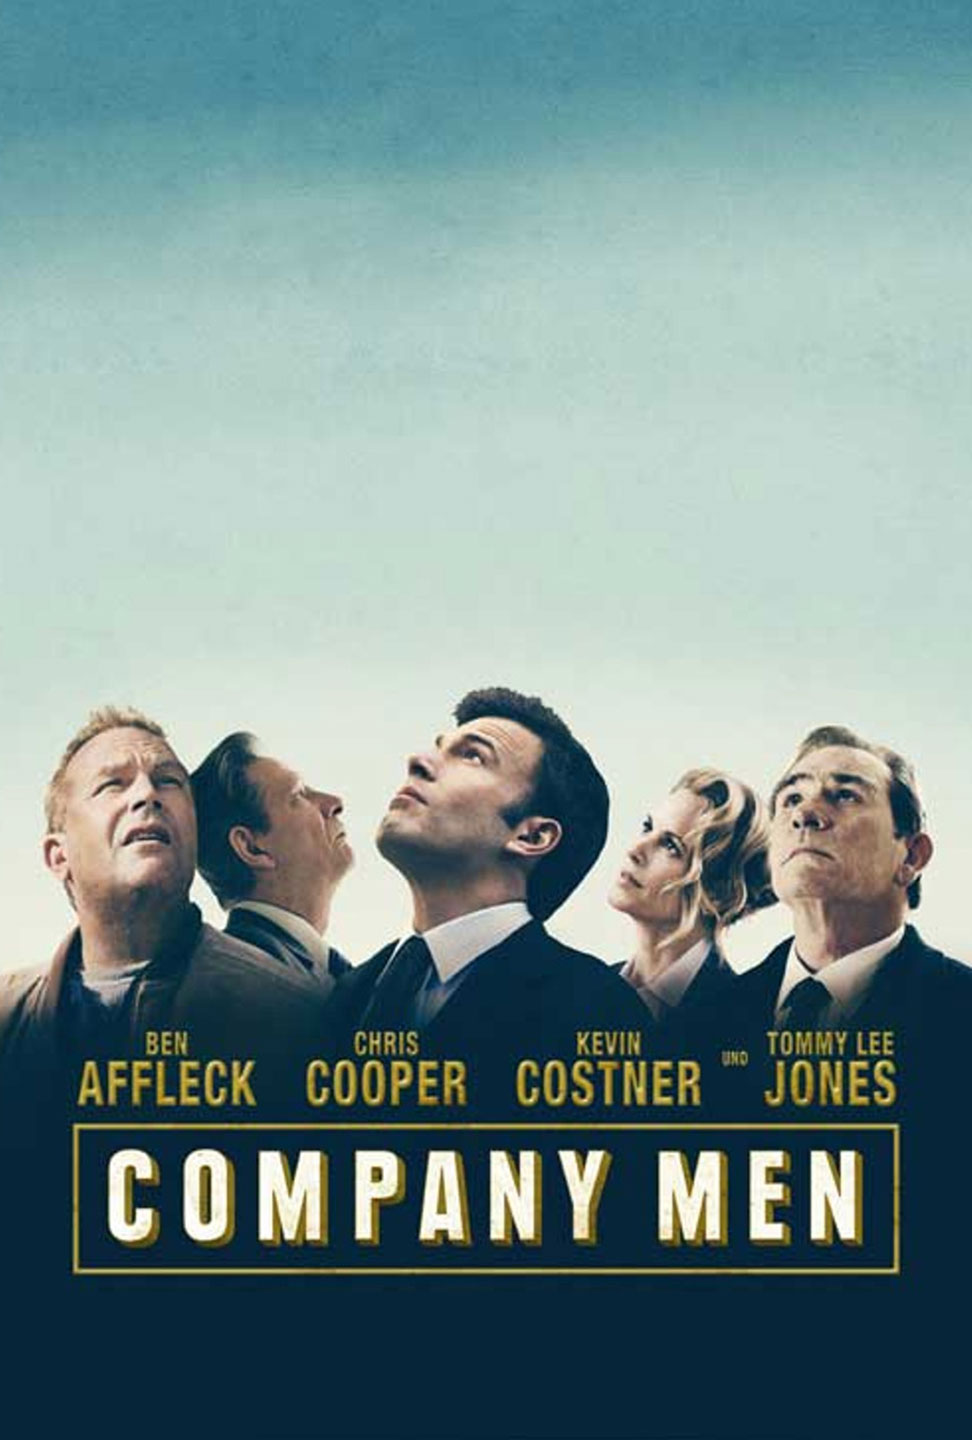 Featured image for “The Company Men”